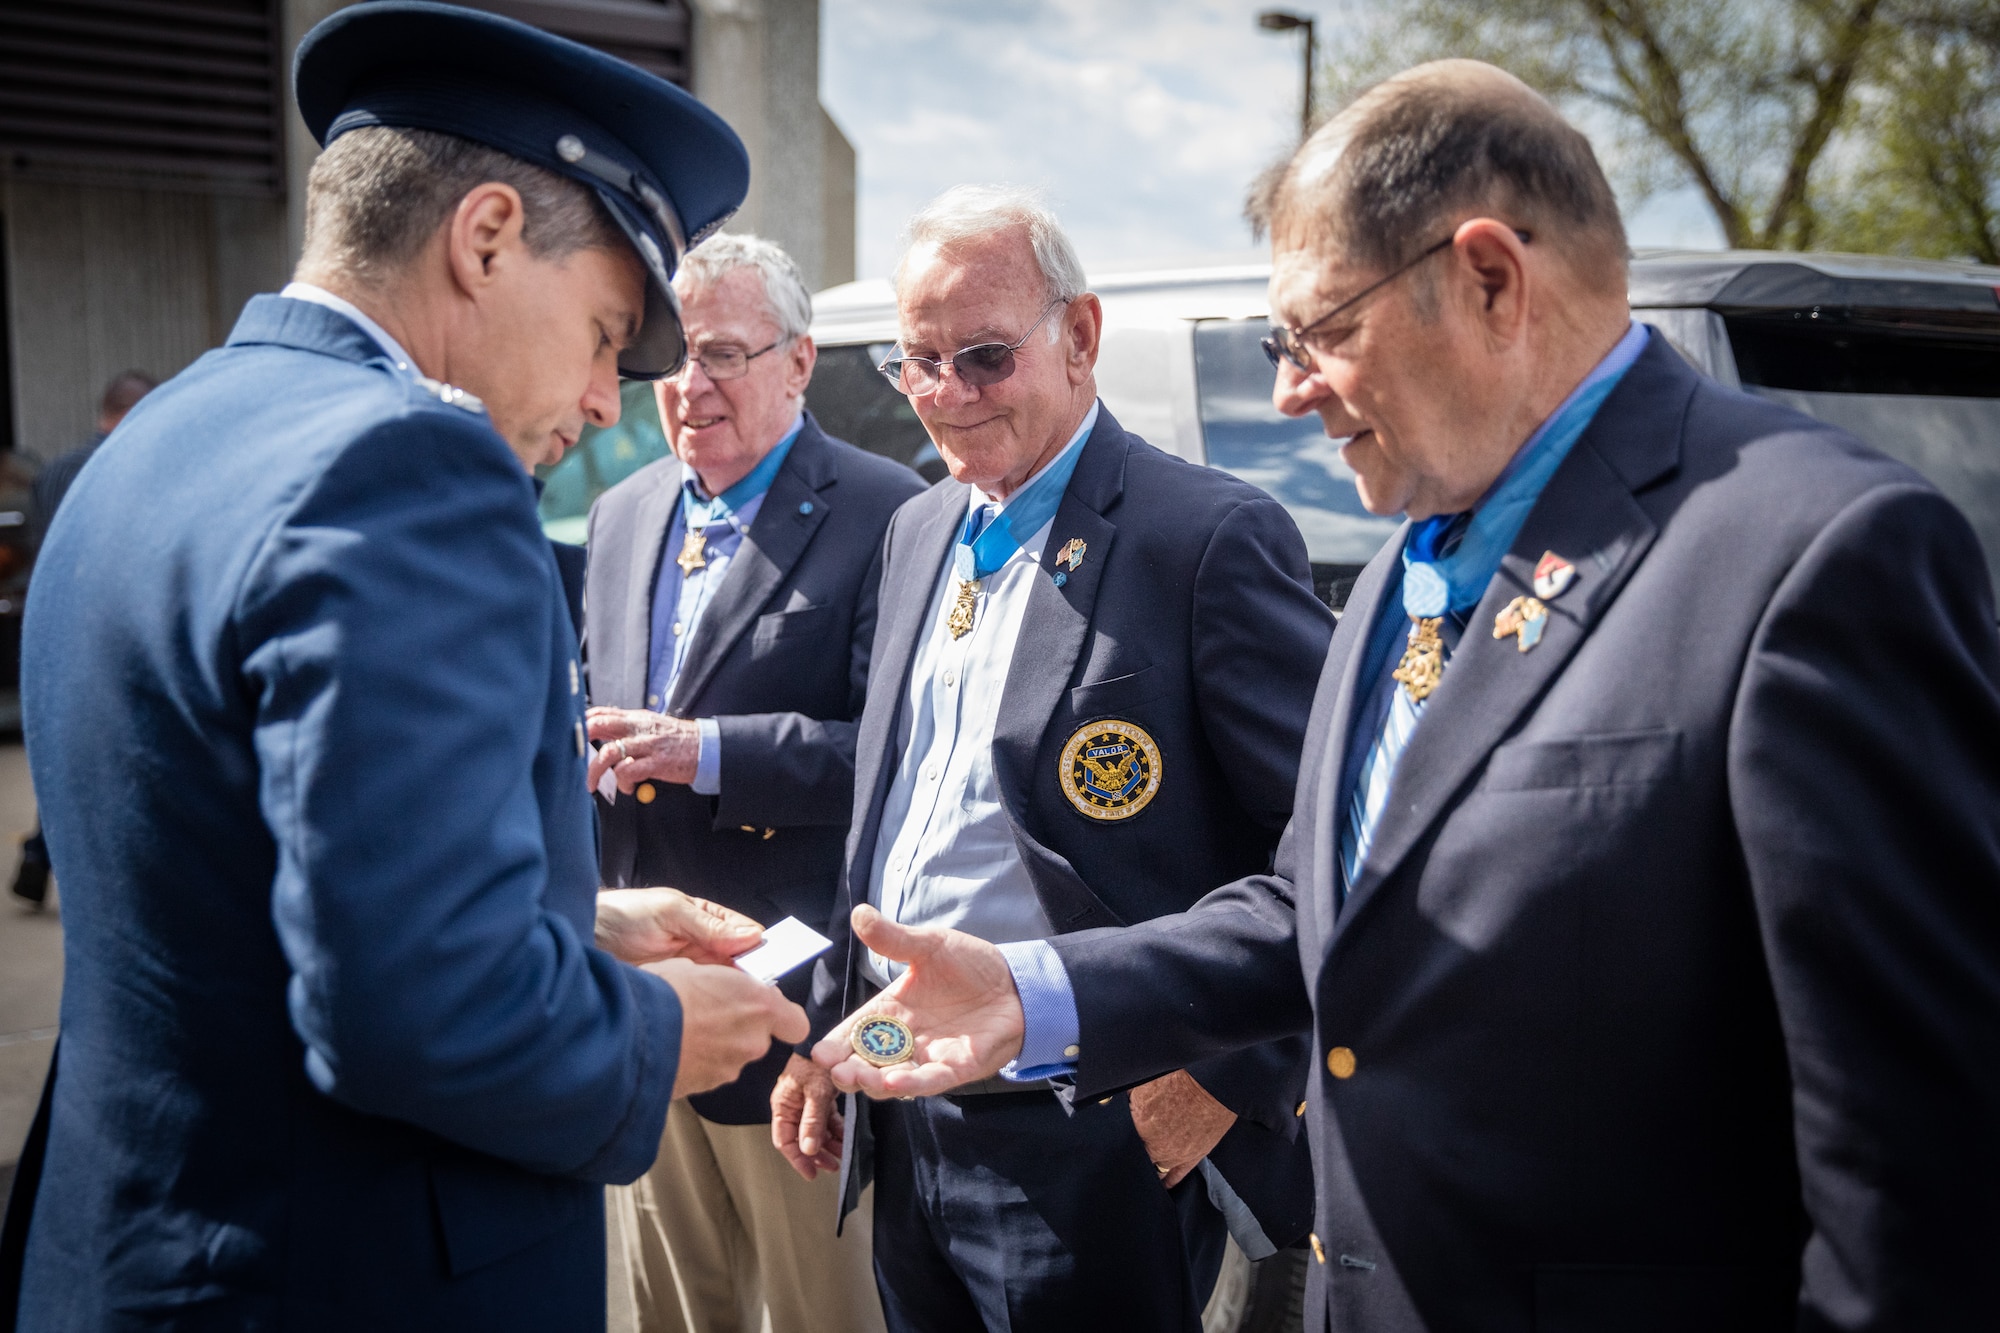 Medal of Honor Recipient, Mr. Harold "Hal" Fritz (right), exchanges coins with Col. Anthony Polashek (left), 934th Airlift Wing commander, upon his and fellow Medal of Honor Recipients' (center right), Mr. Robert Patterson and Mr. Thomas Kelley, arrivial at the Minneapolis-St. Paul Air Reserve Station, Minn.  The Medal of Honor Meet and Greet  honors military, law enforcement, and first responders affiliated with assisting the Twin Cities 2016 hosting of the Congressional Medal of Honor Convention, set for October of this year.  (U.S. Air Force photo by Shannon McKay)